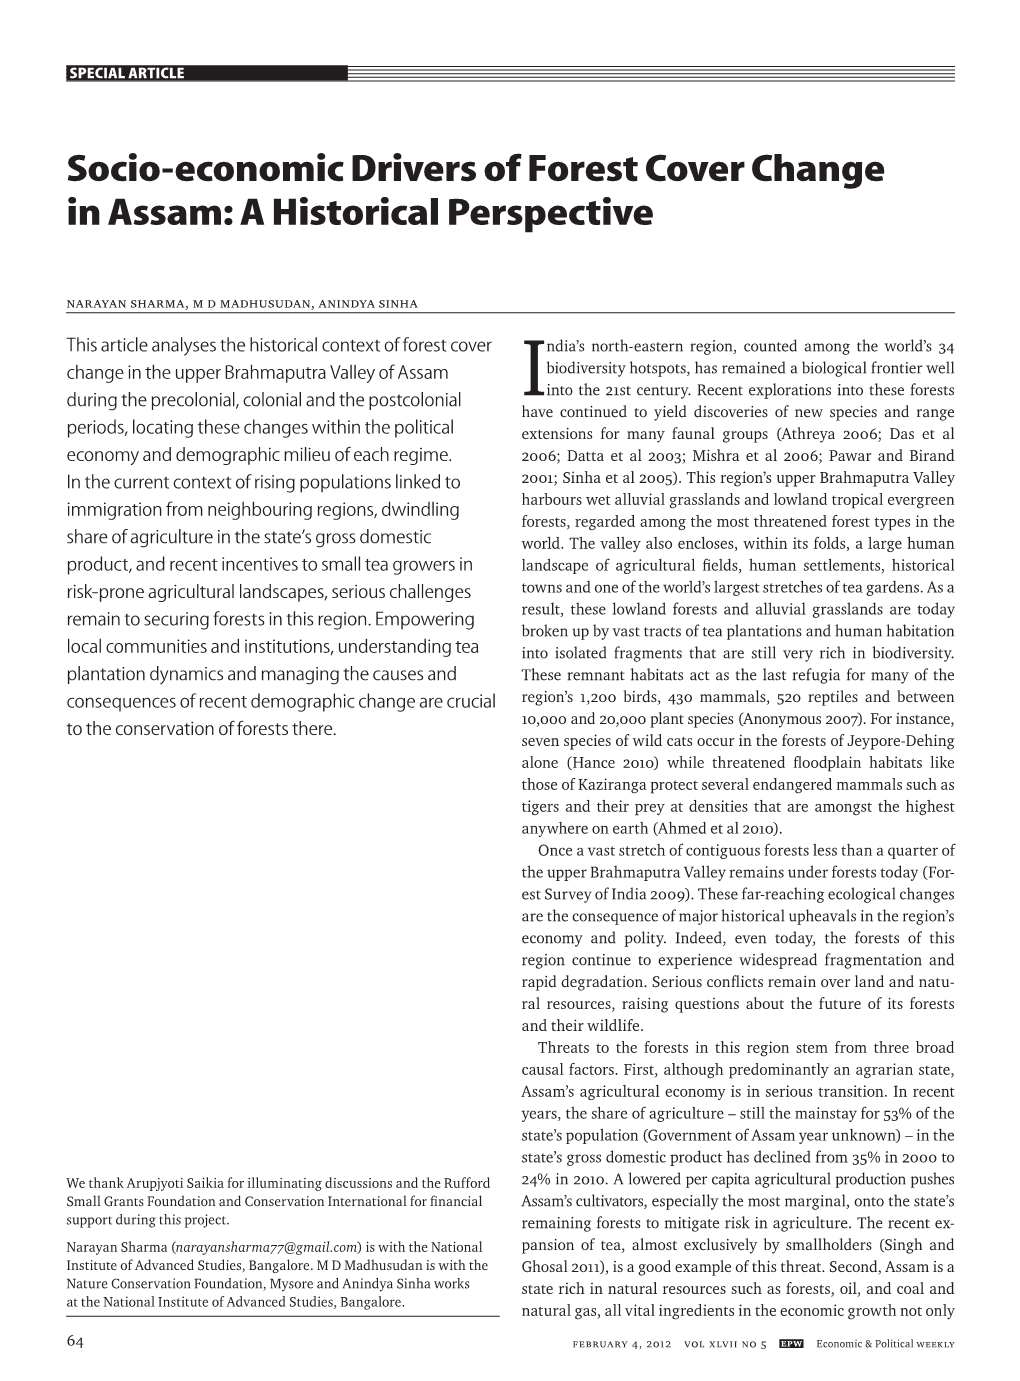 Socio-Economic Drivers of Forest Cover Change in Assam: a Historical Perspective